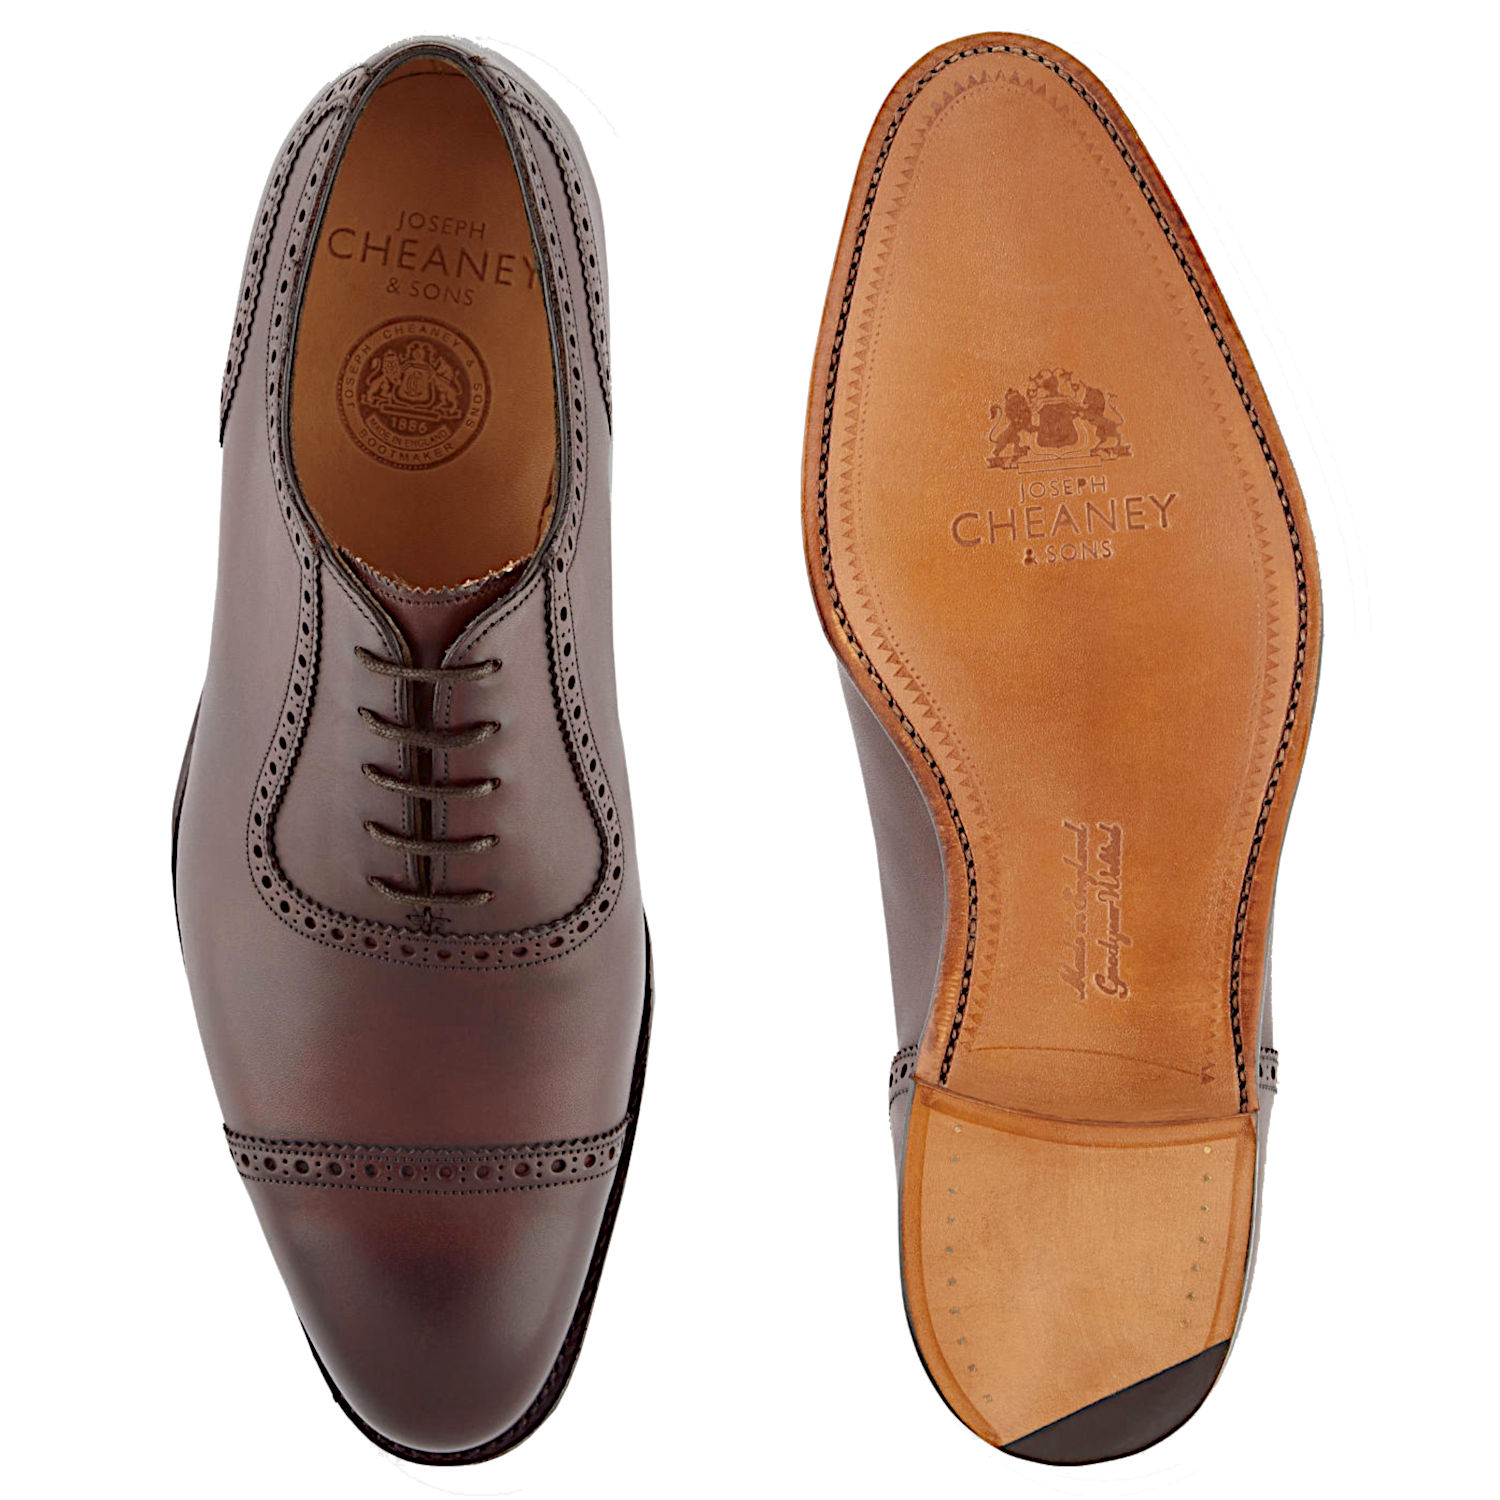 cheaney city collection off 68% - www 